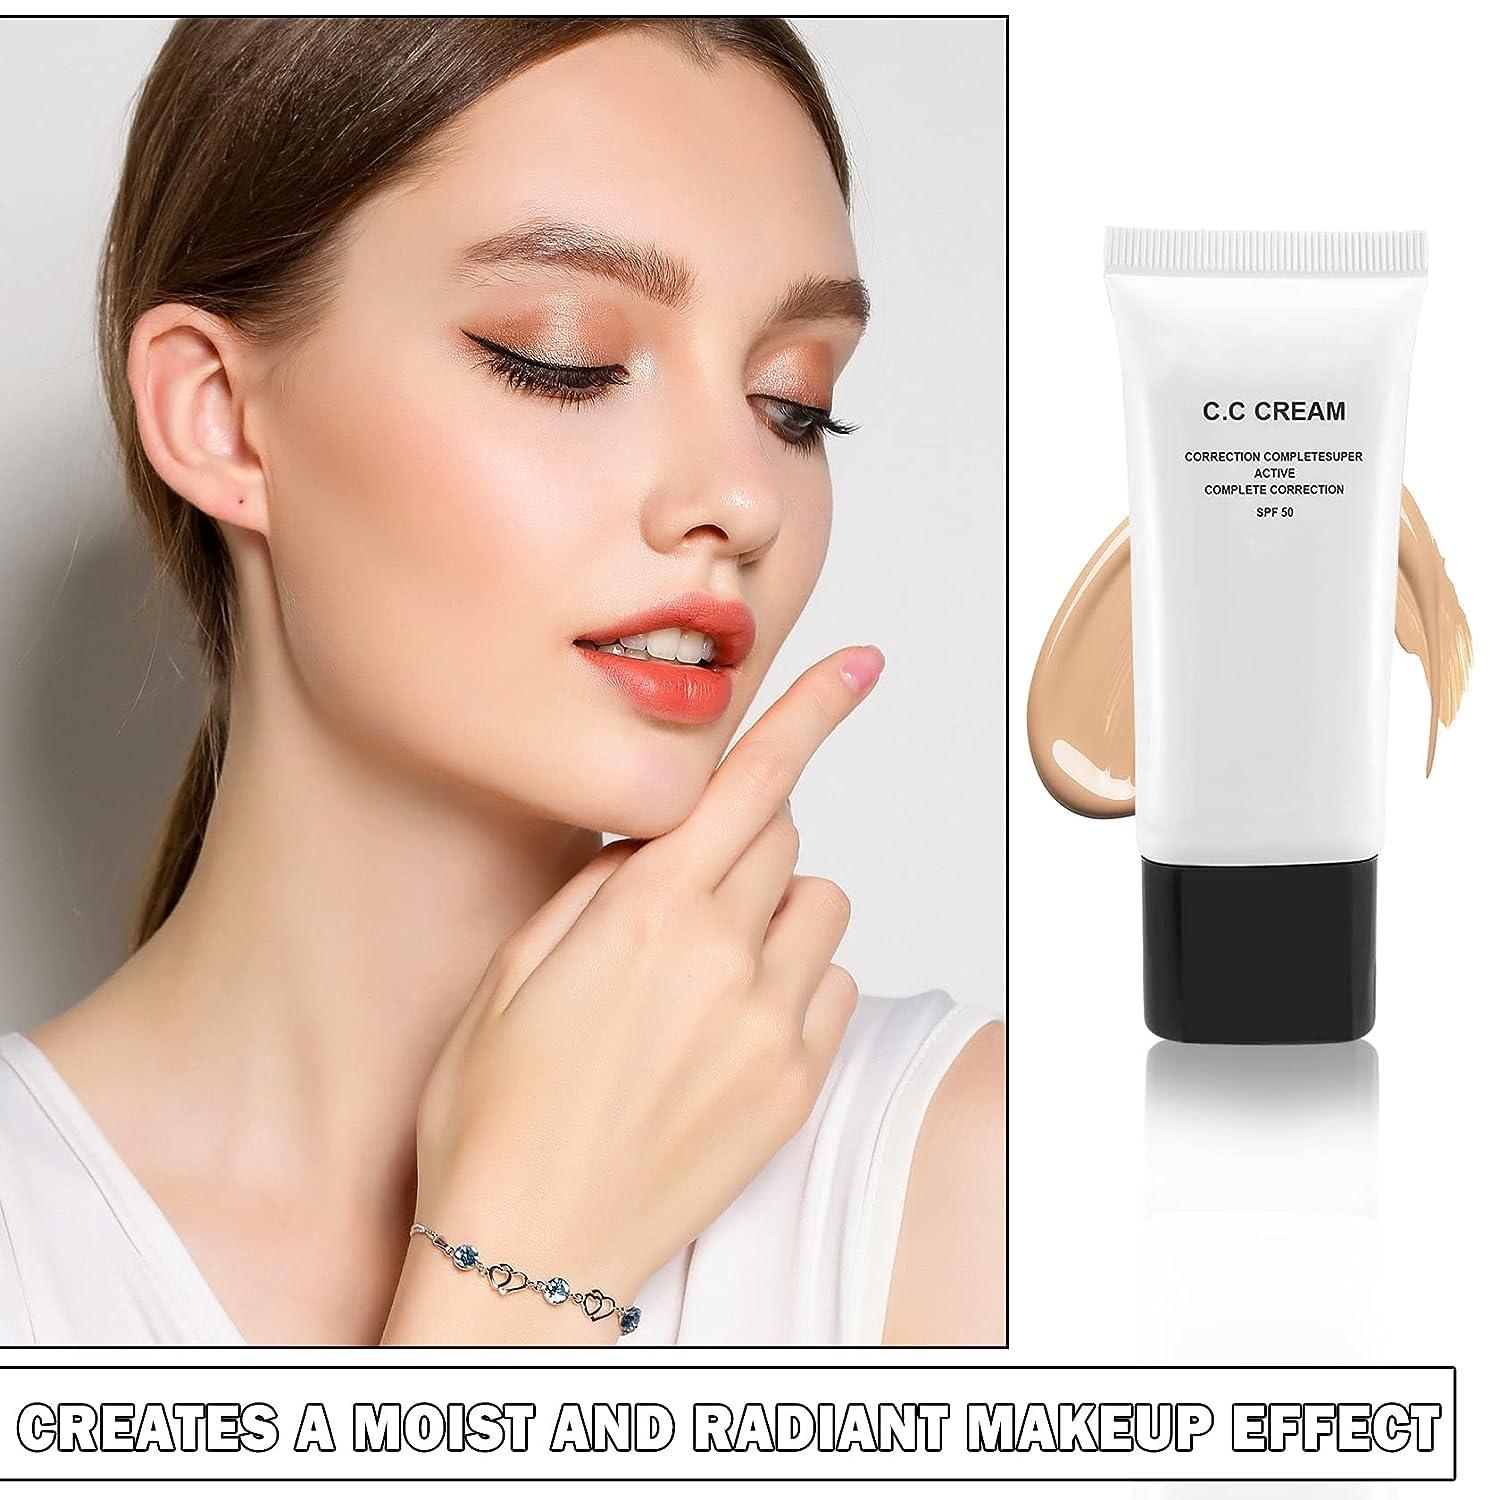  Skin Tone Adjusting CC Cream SPF 50,Cosmetics CC Cream, Colour  Correcting Self Adjusting for Mature Skin, All-In-One Face Sunscreen and  Foundation ,Pre-makeup Primer Moisturizing Skin Concealer Brightening Skin  Tone (Natural) 